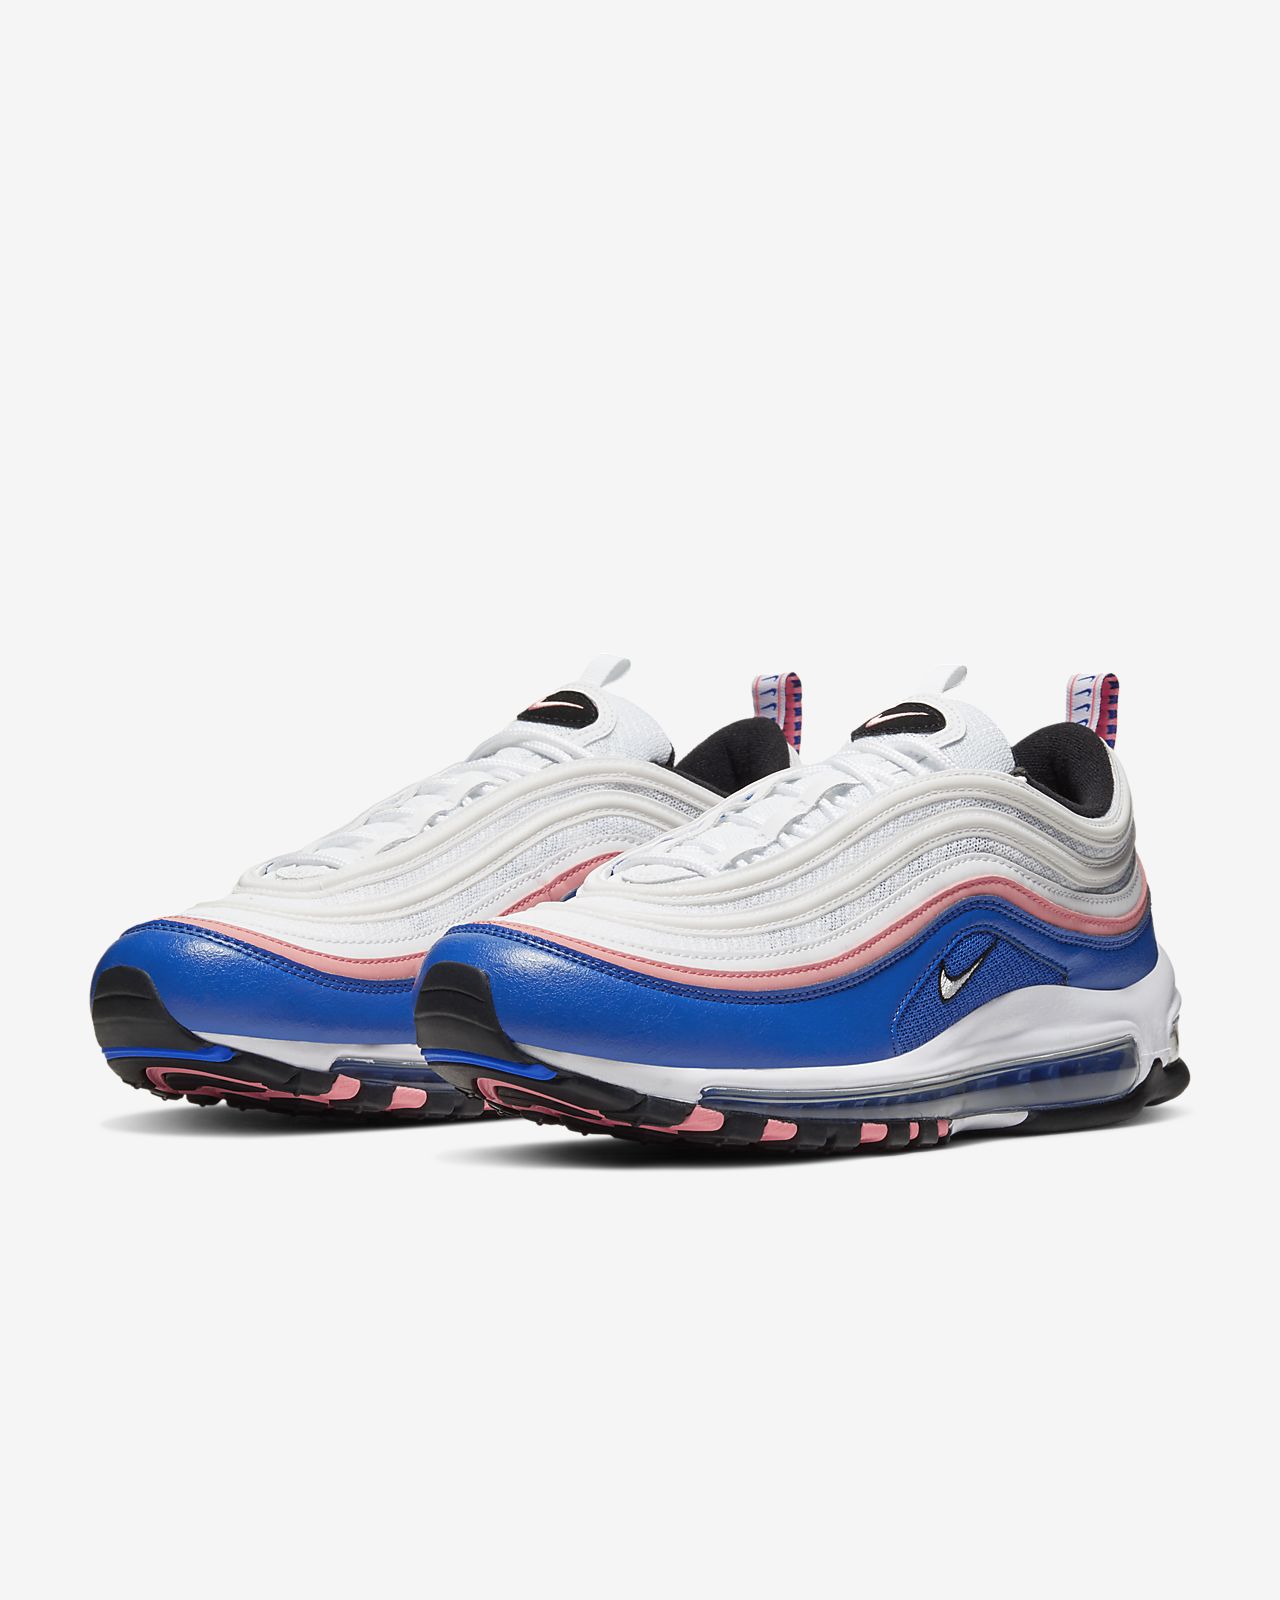 blue and pink 97